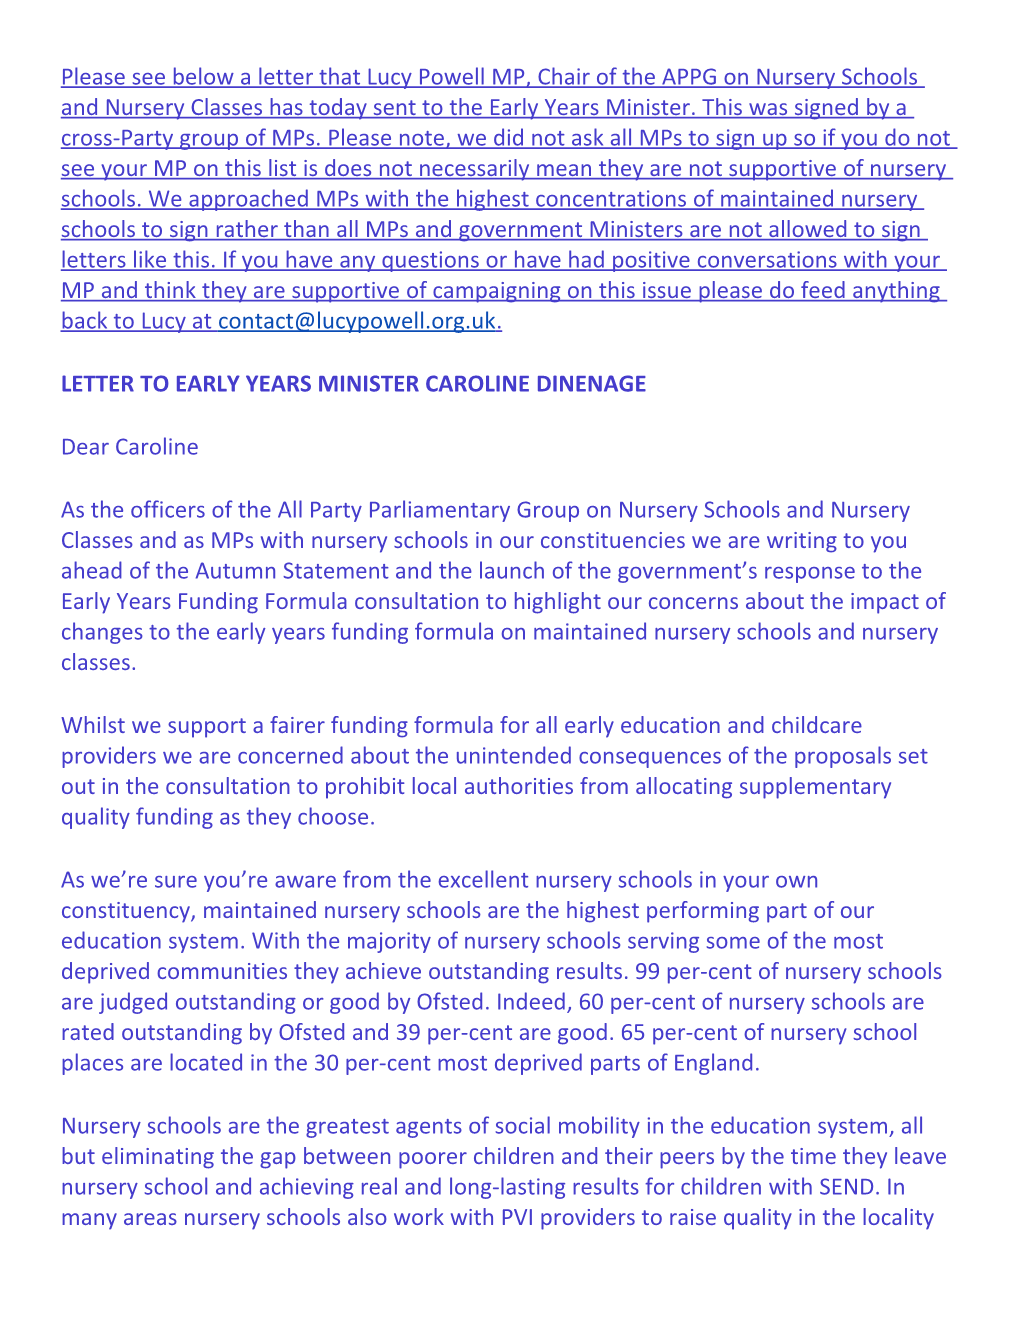 Letter to Early Years Minister Caroline Dinenage